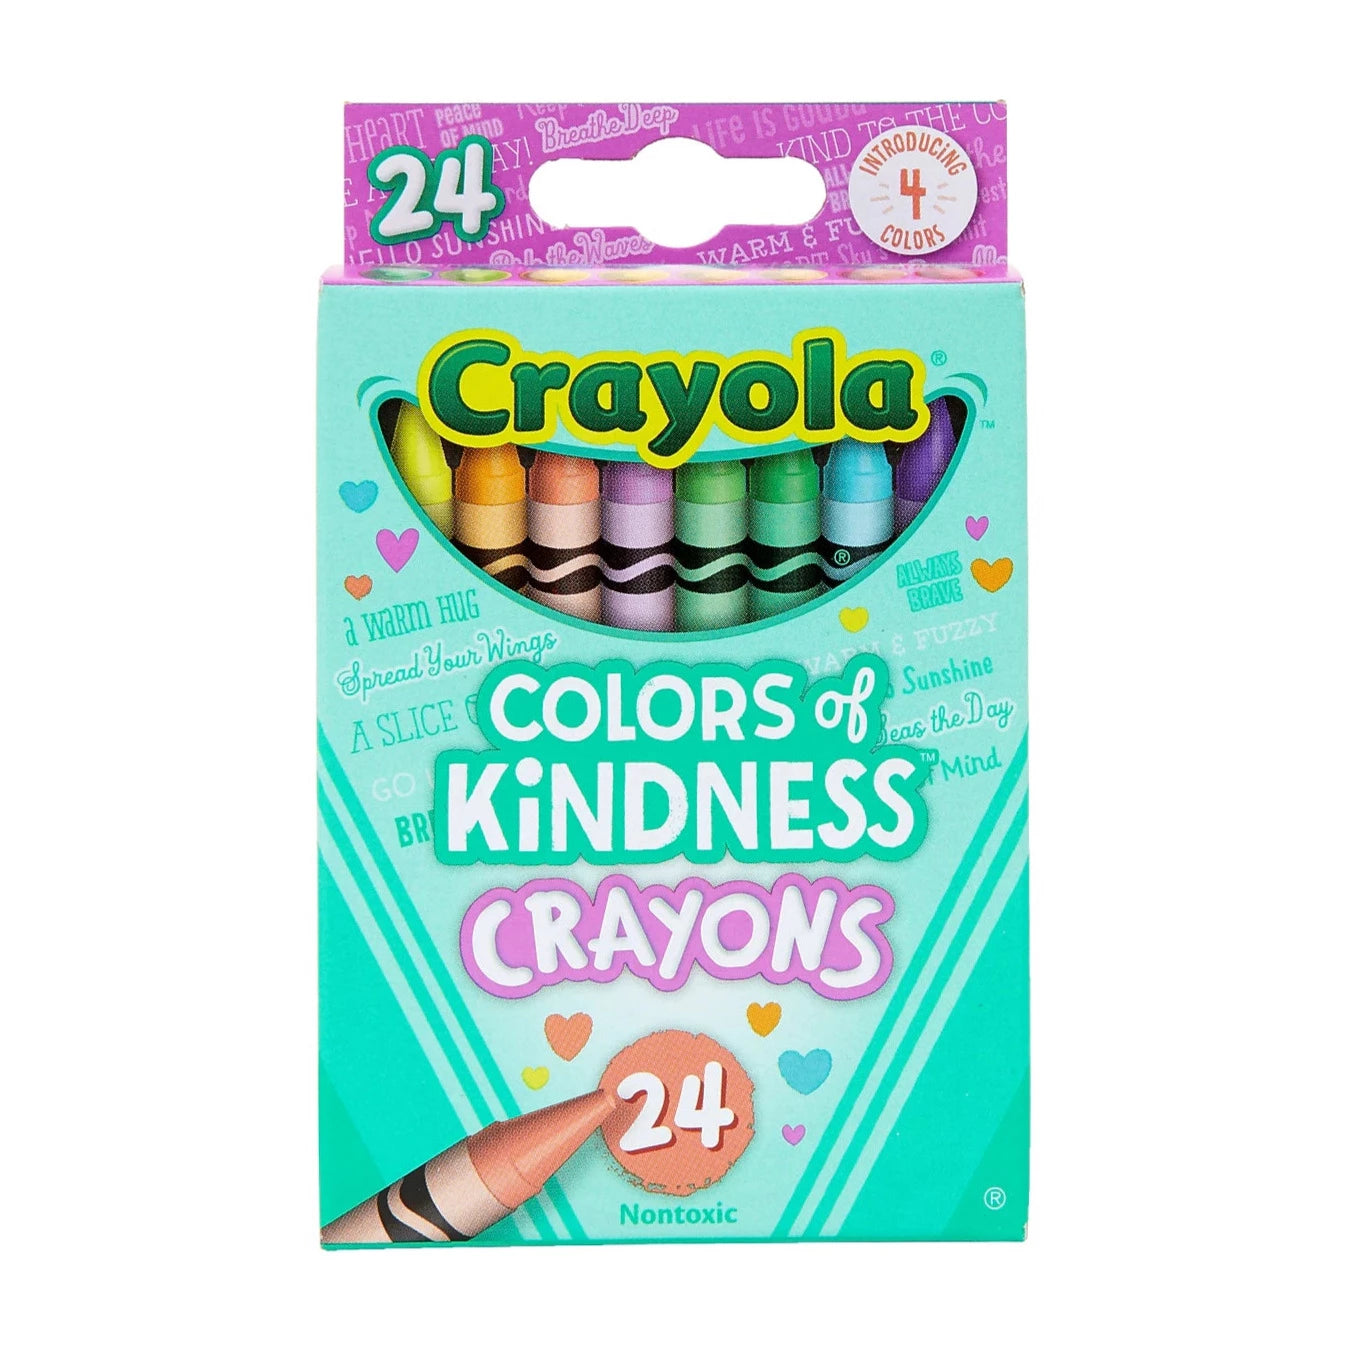 10 PACKAGES 24 COUNT CRAYONS BOXES NON - TOXIC SCHOOL COLORING ART NEW